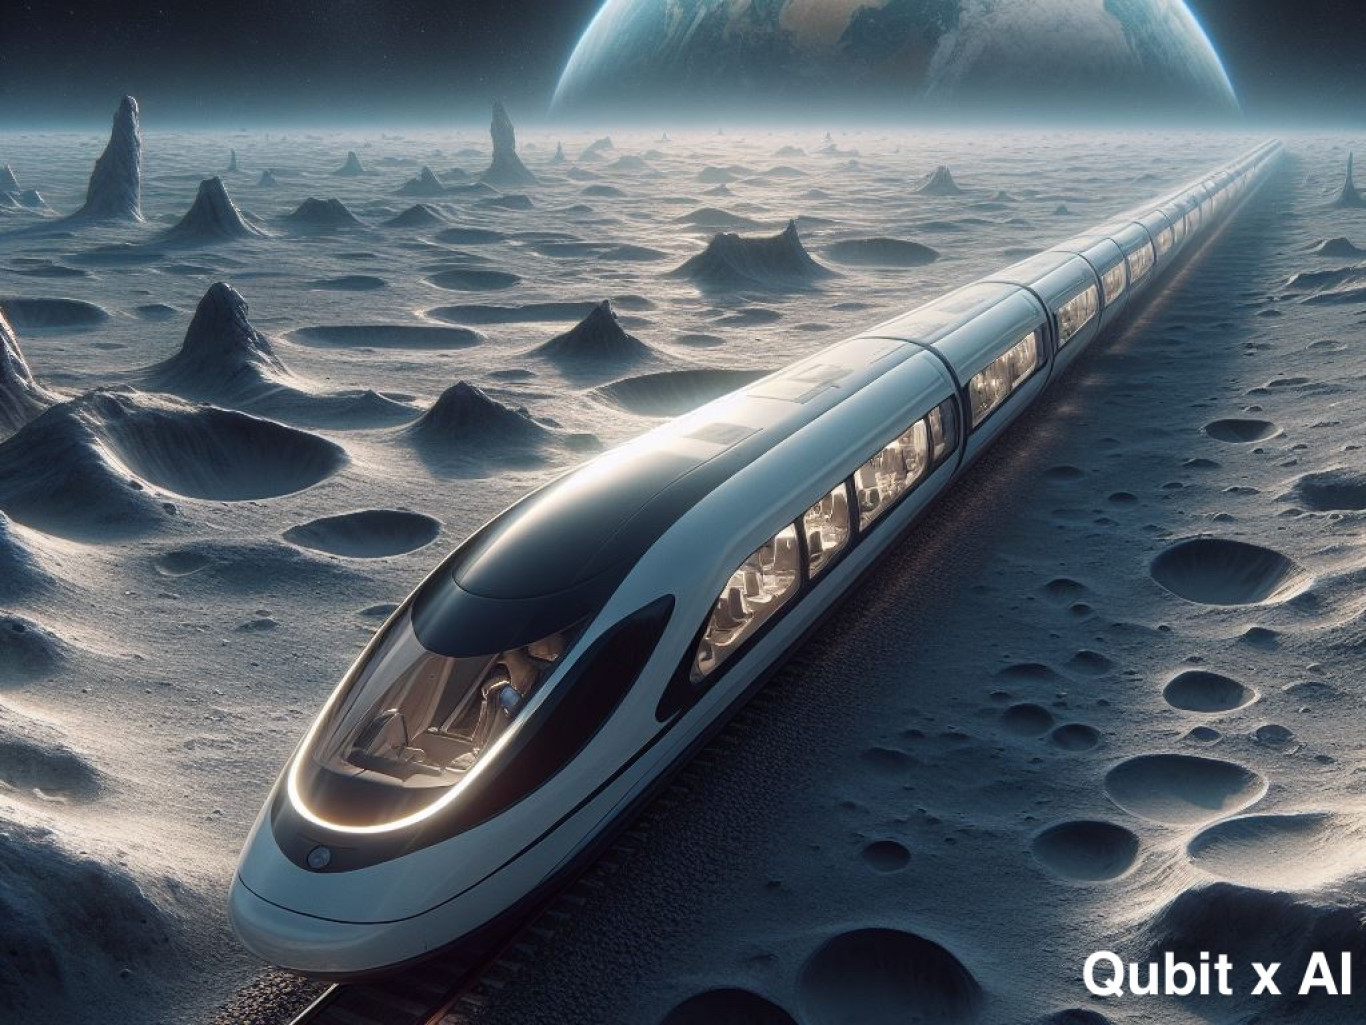 The United States will install a railway on the moon